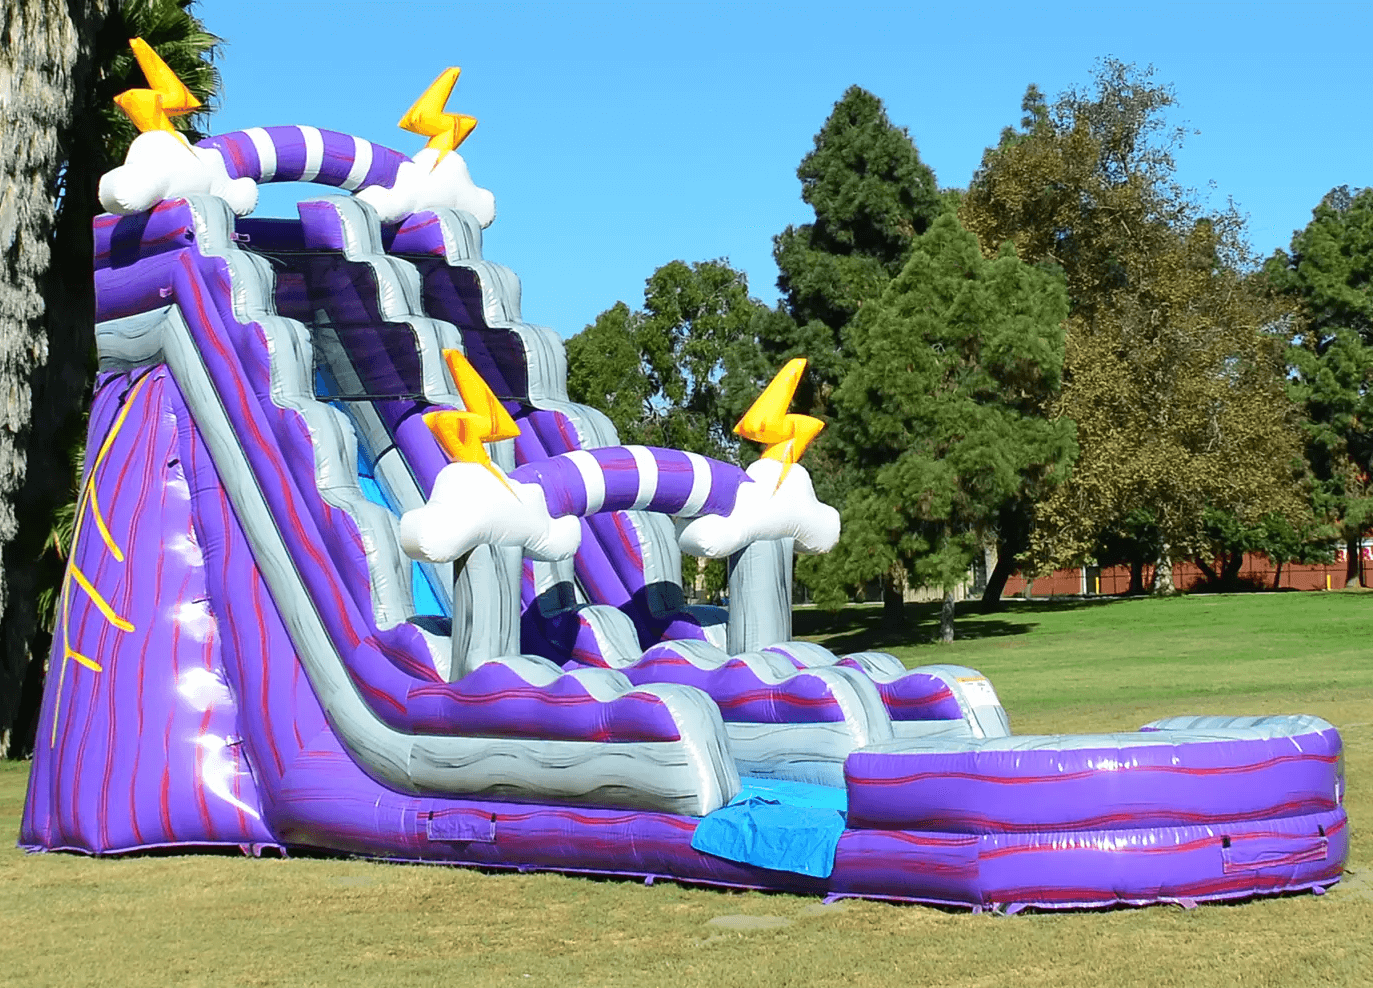 Thunder inflatable water slide rental in a green field.